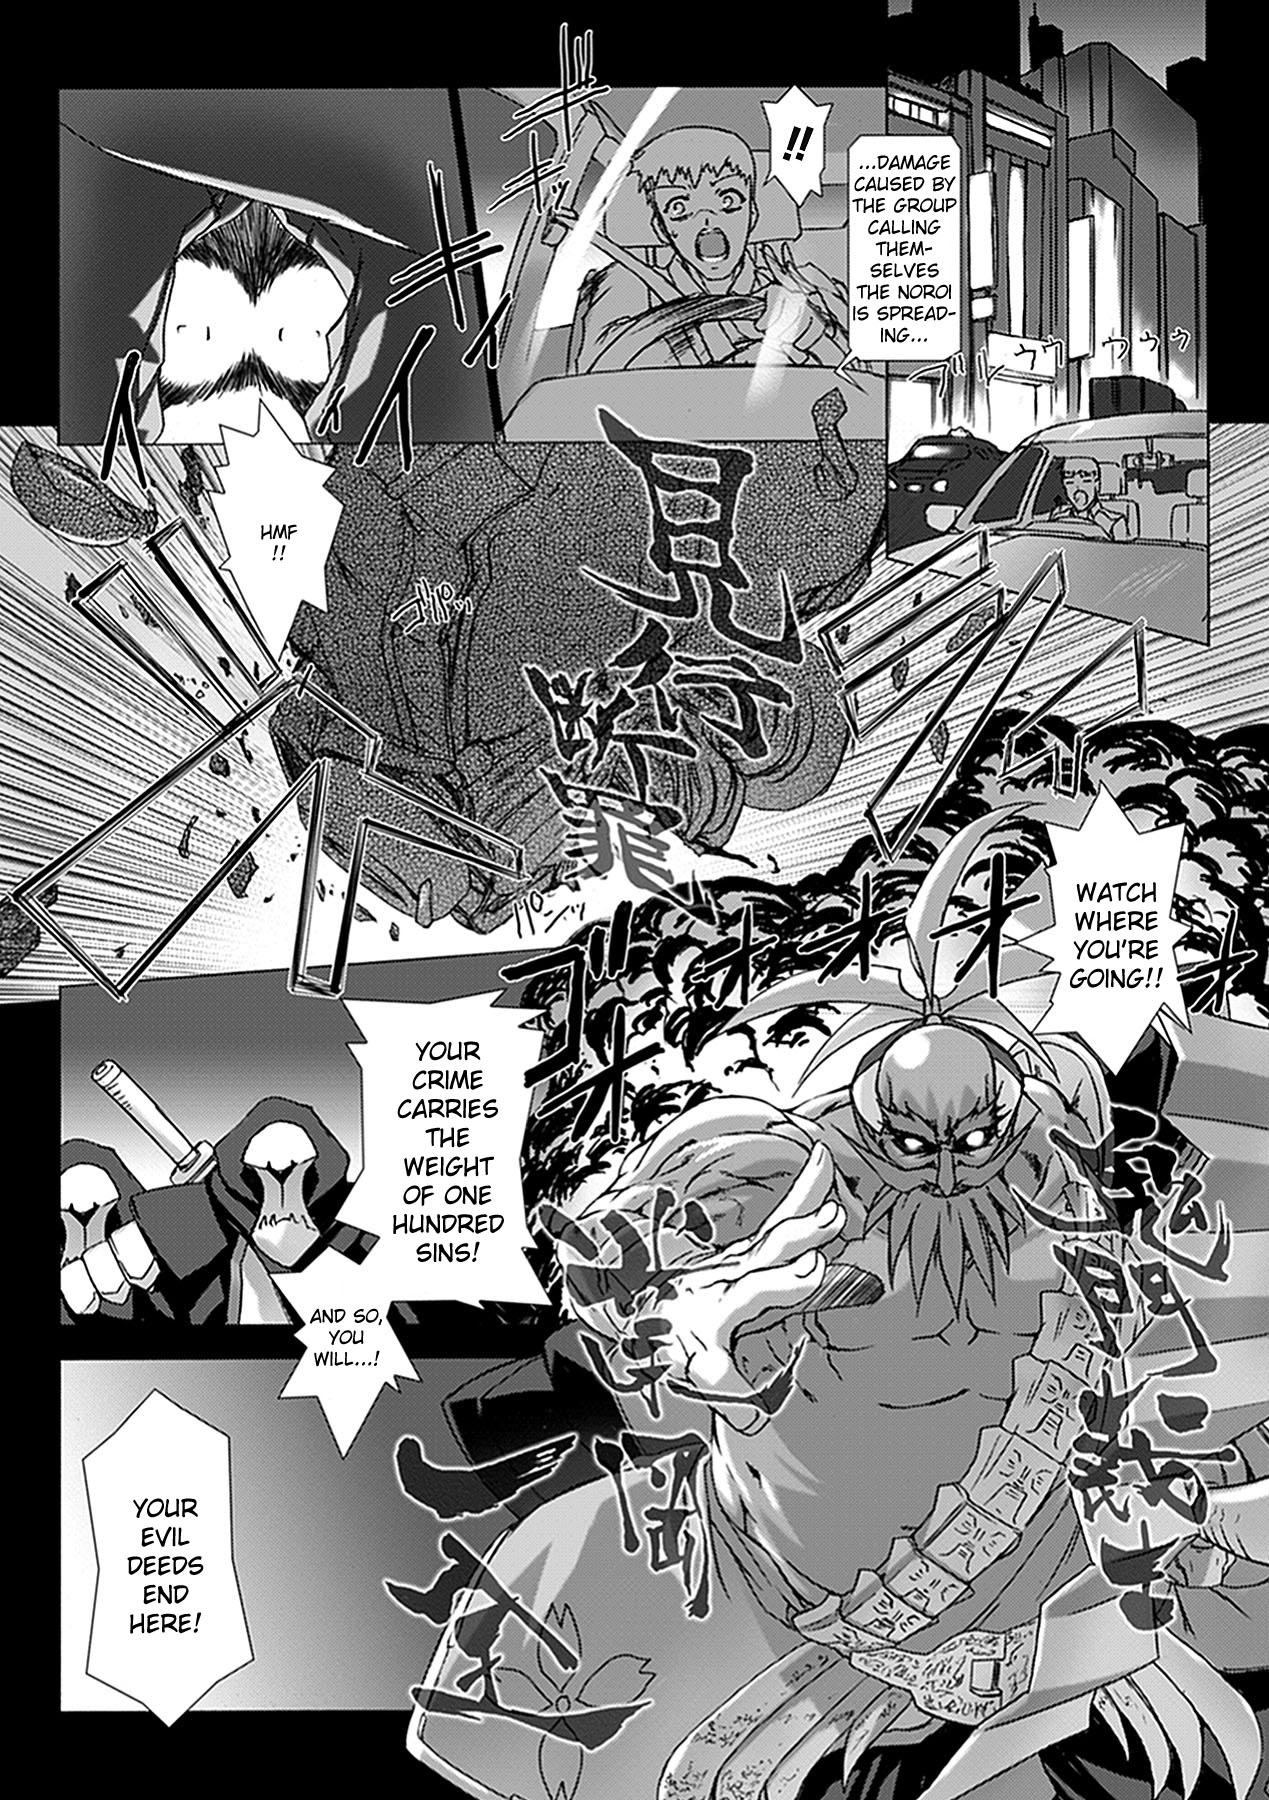 Best Blowjobs Ever Beat Blades Haruka Book of the Blade - Beat blades haruka Wet - Page 11